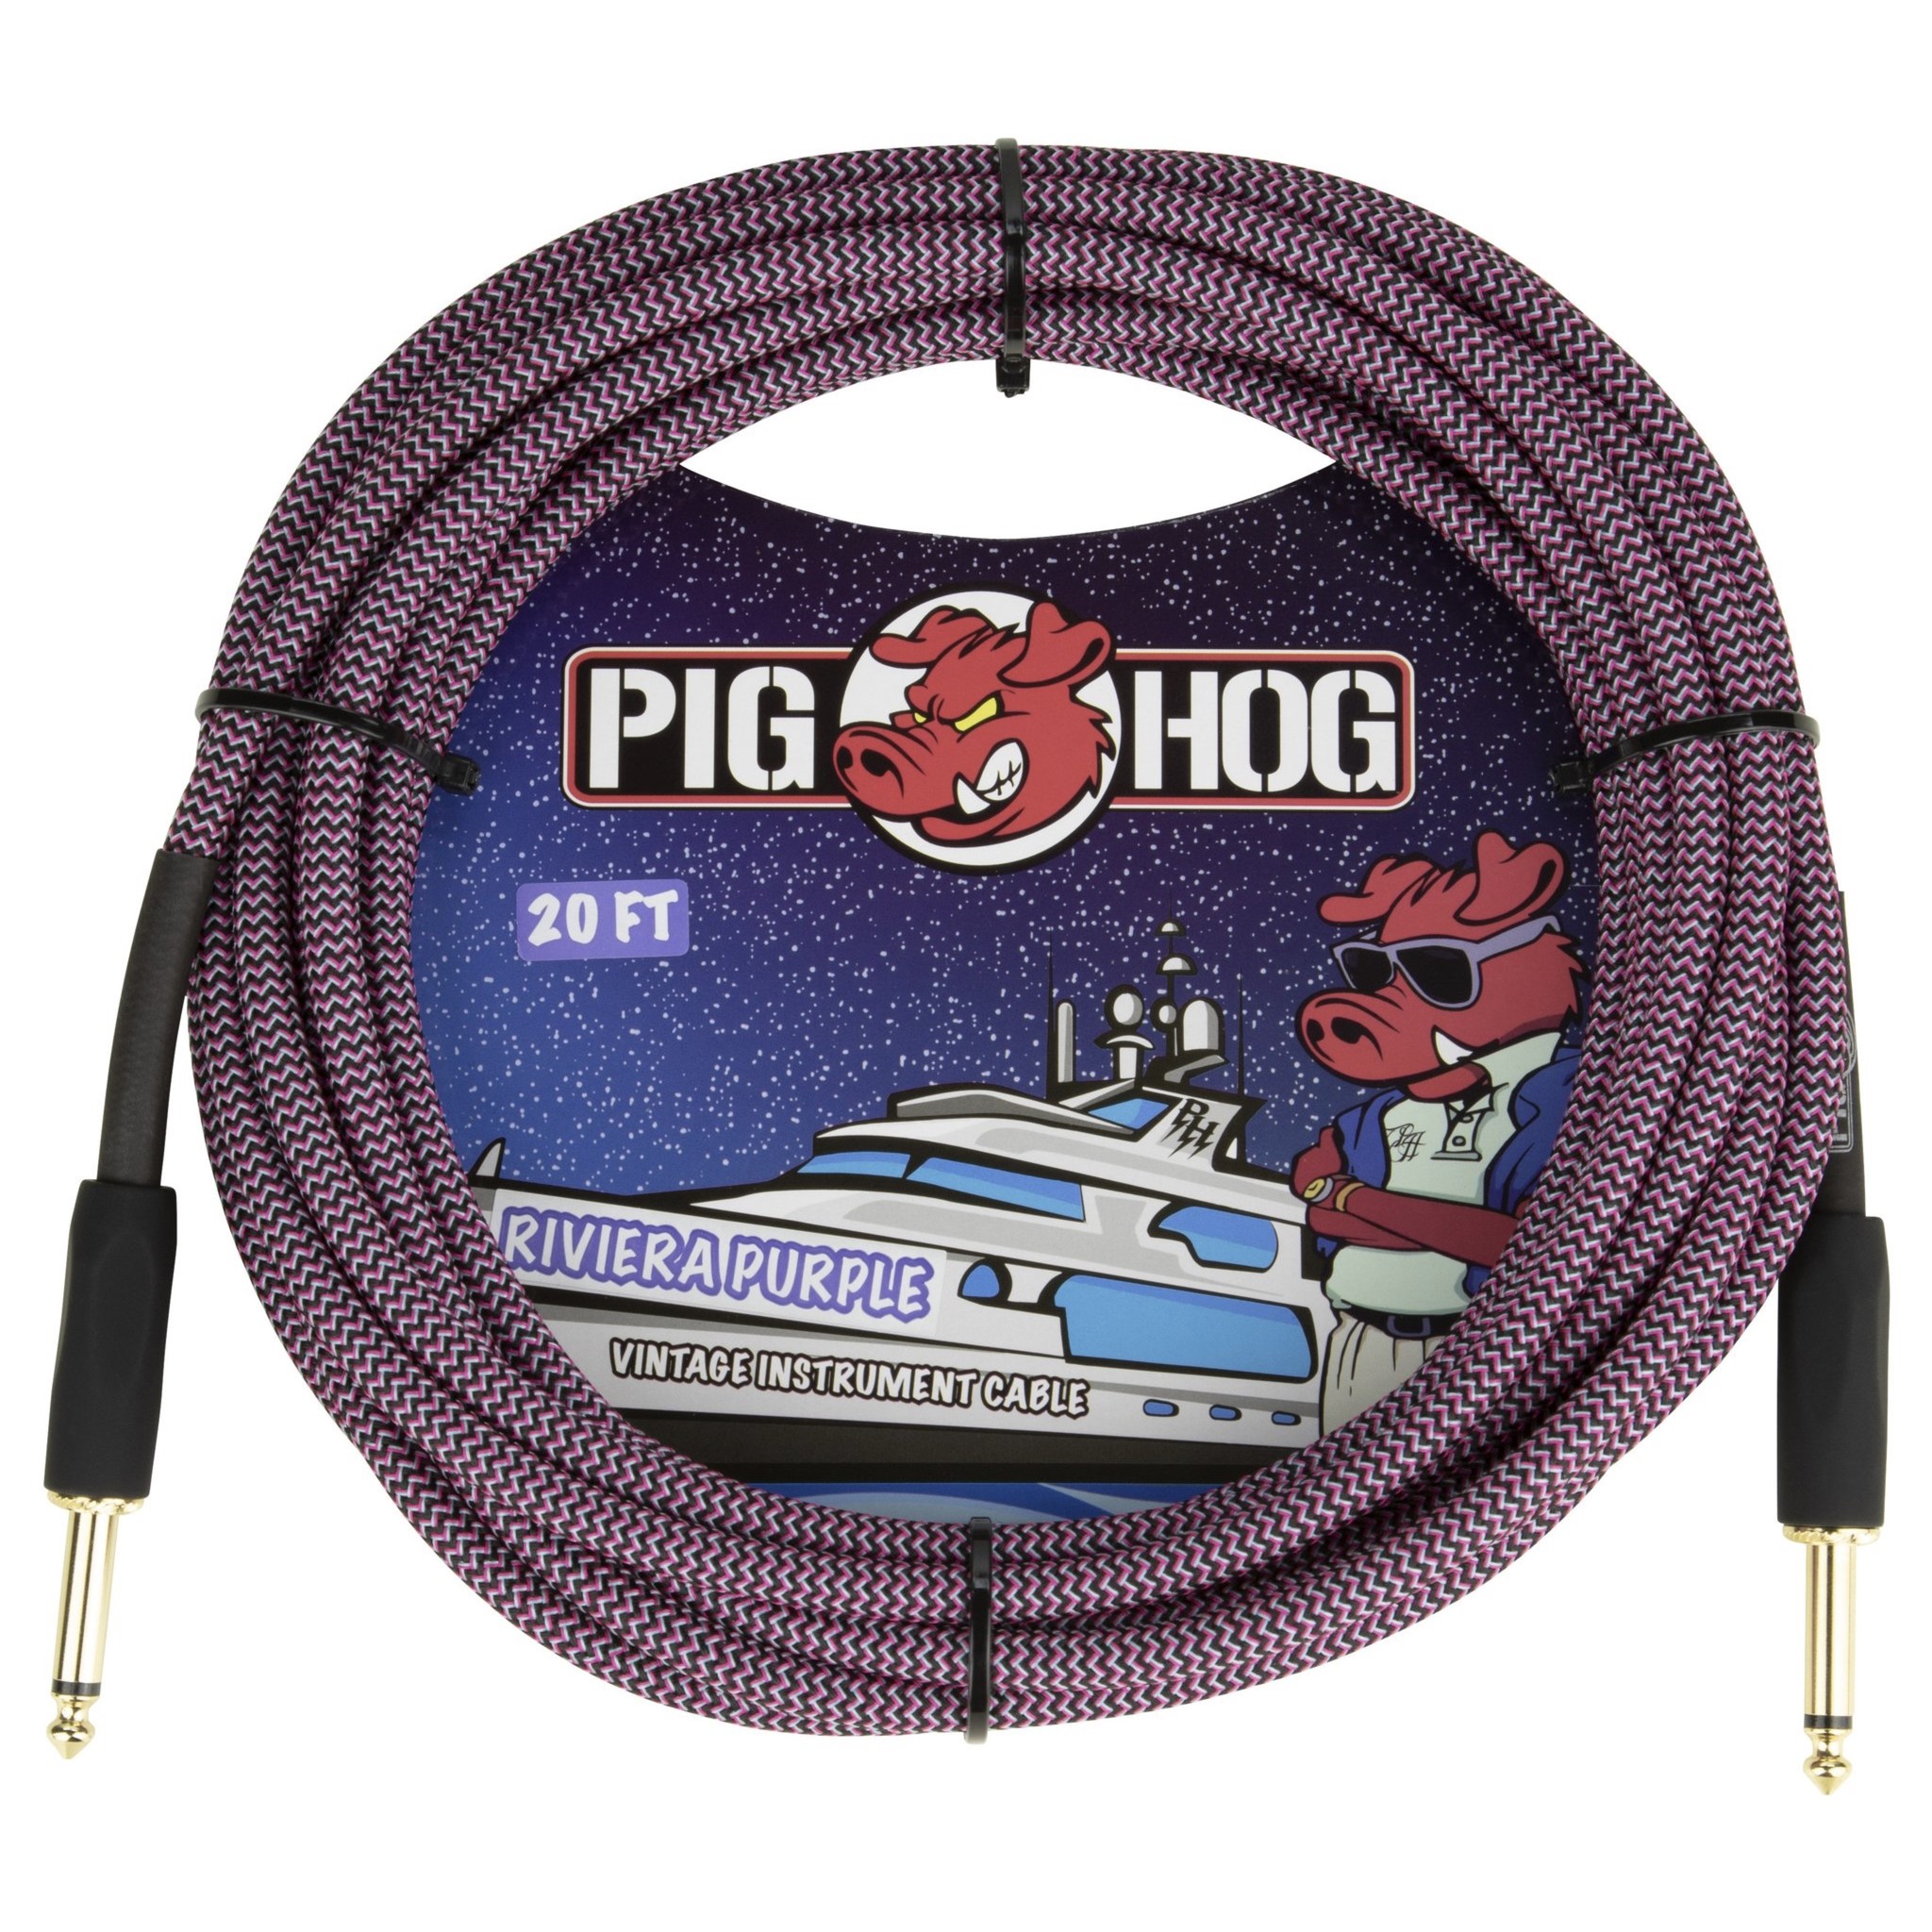 Pig Hog 20-Foot Vintage Woven Instrument Cable, 1/4" Straight-Straight Riviera Purple